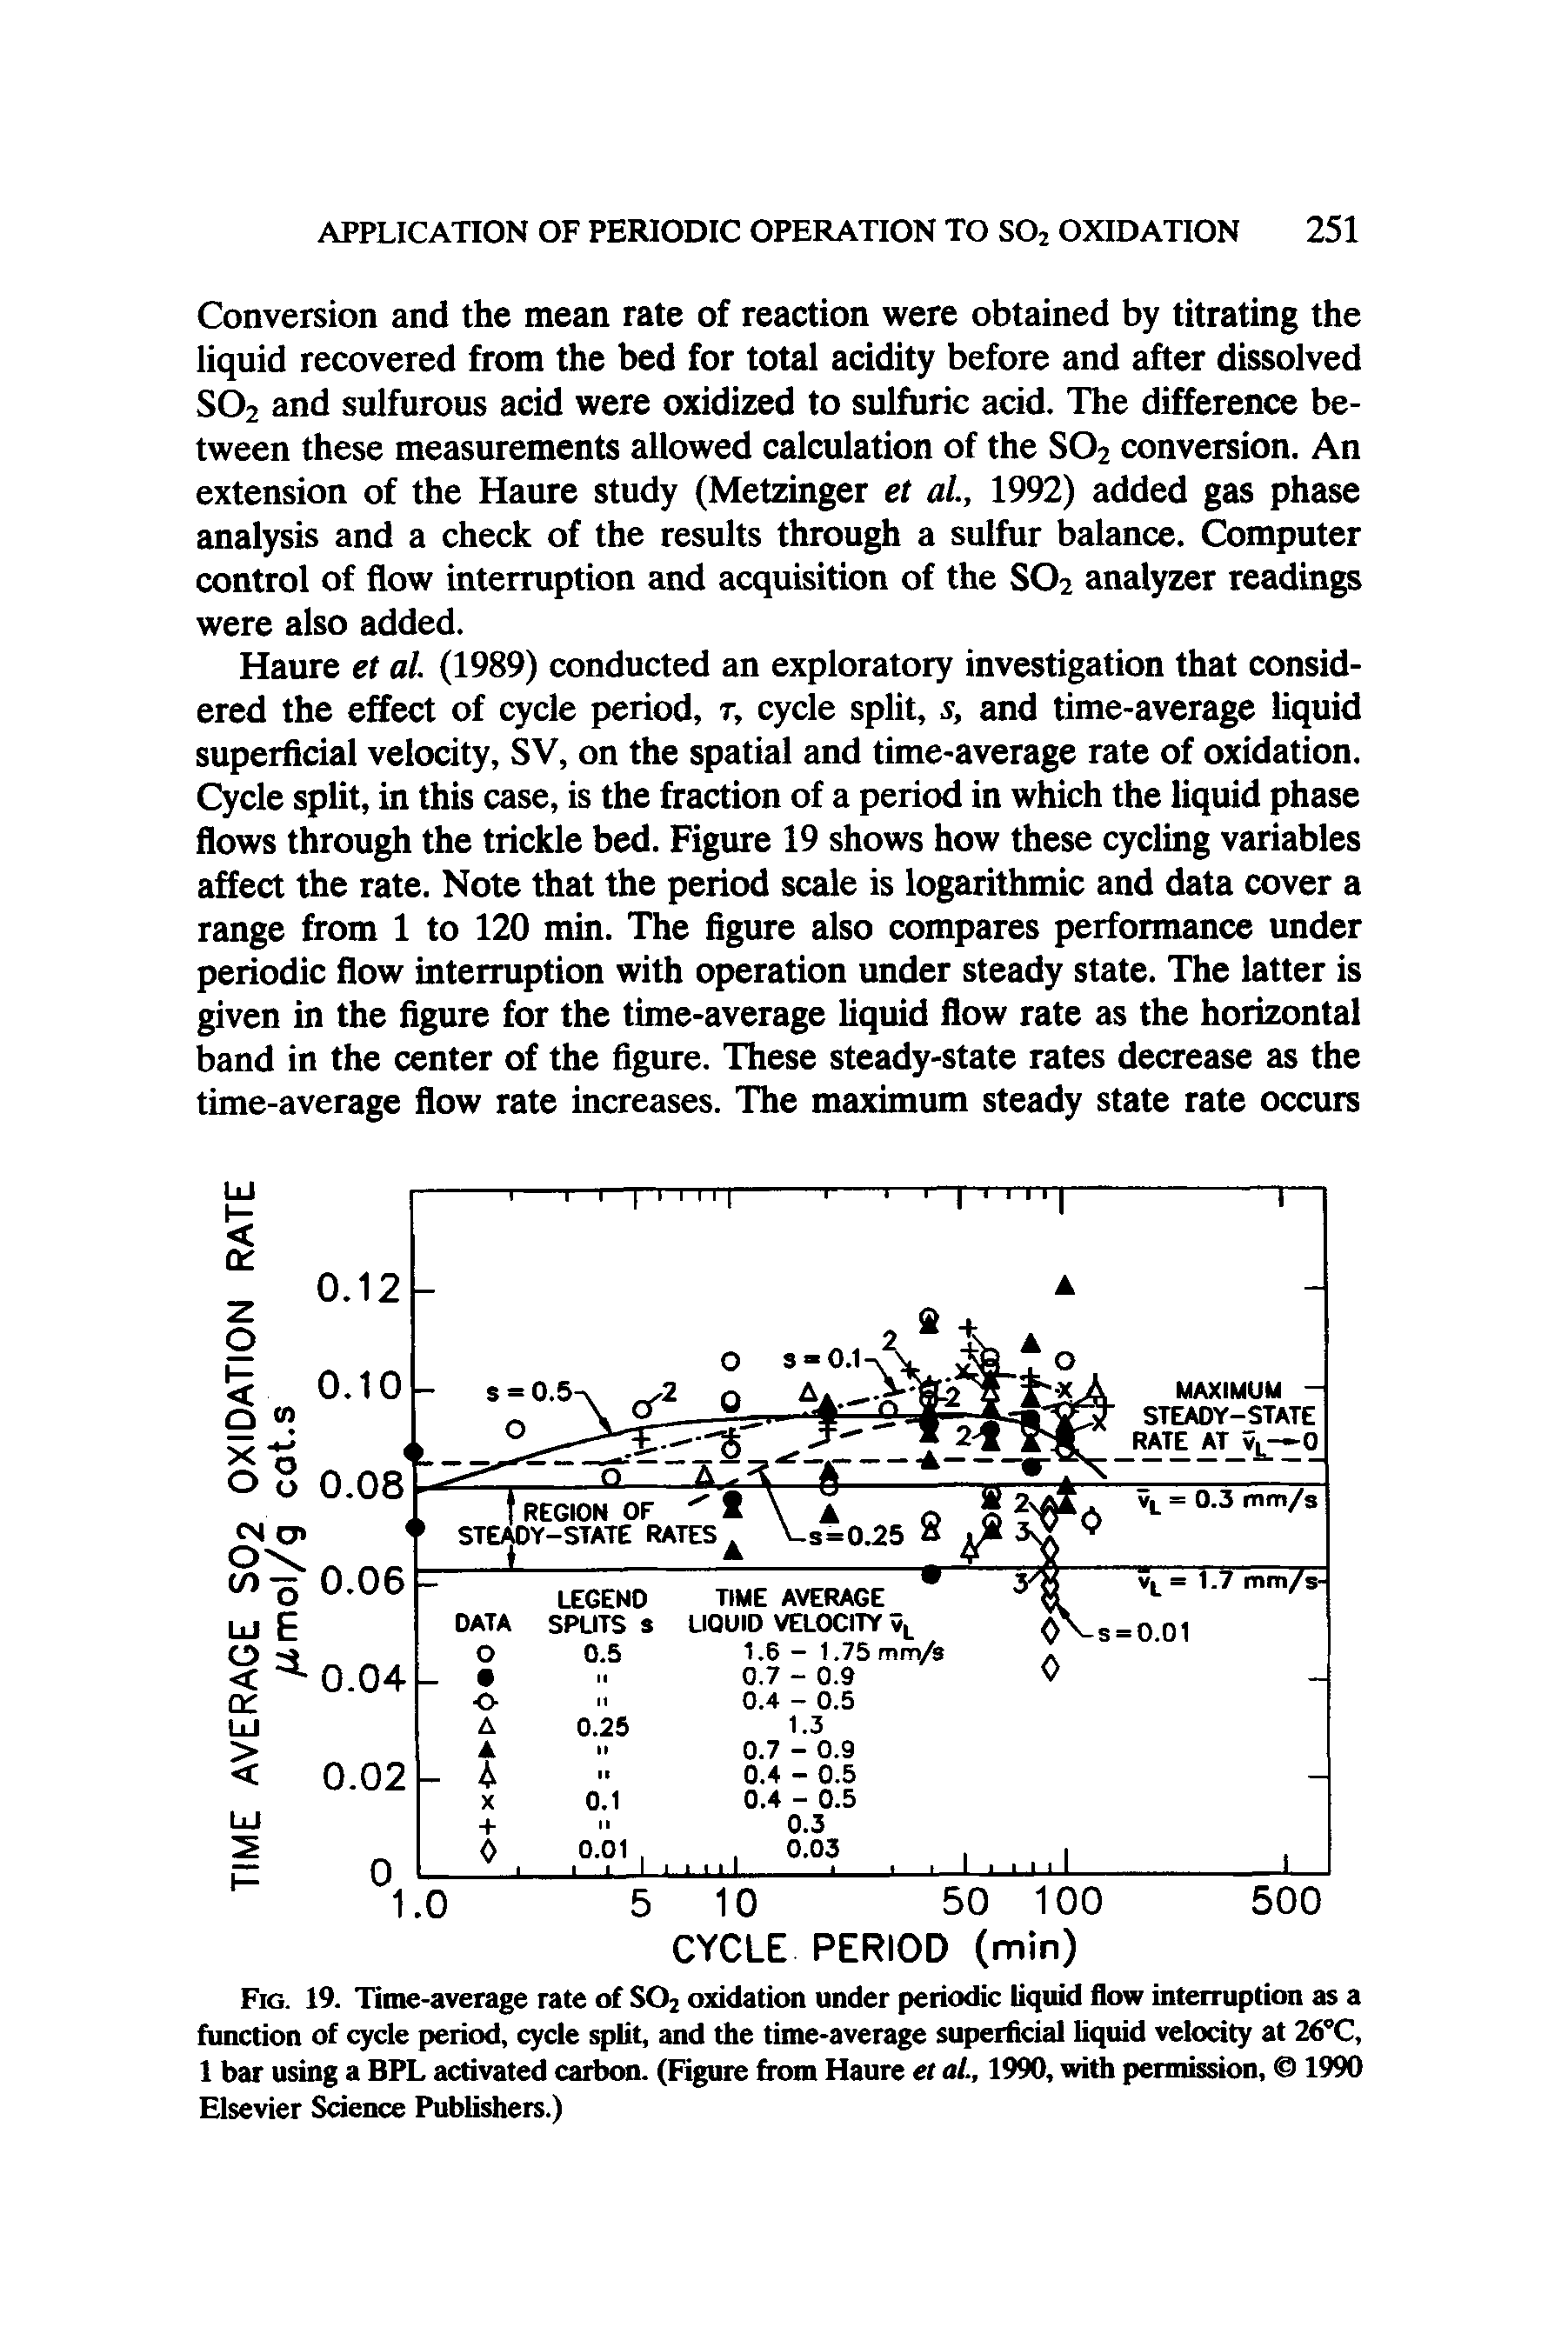 Fig. 19. Time-average rate of S02 oxidation under periodic liquid flow interruption as a function of cycle period, cycle split, and the time-average superficial liquid velocity at 26°C, 1 bar using a BPL activated carbon. (Figure from Haure et al., 1990, with permission, 1990 Elsevier Science Publishers.)...